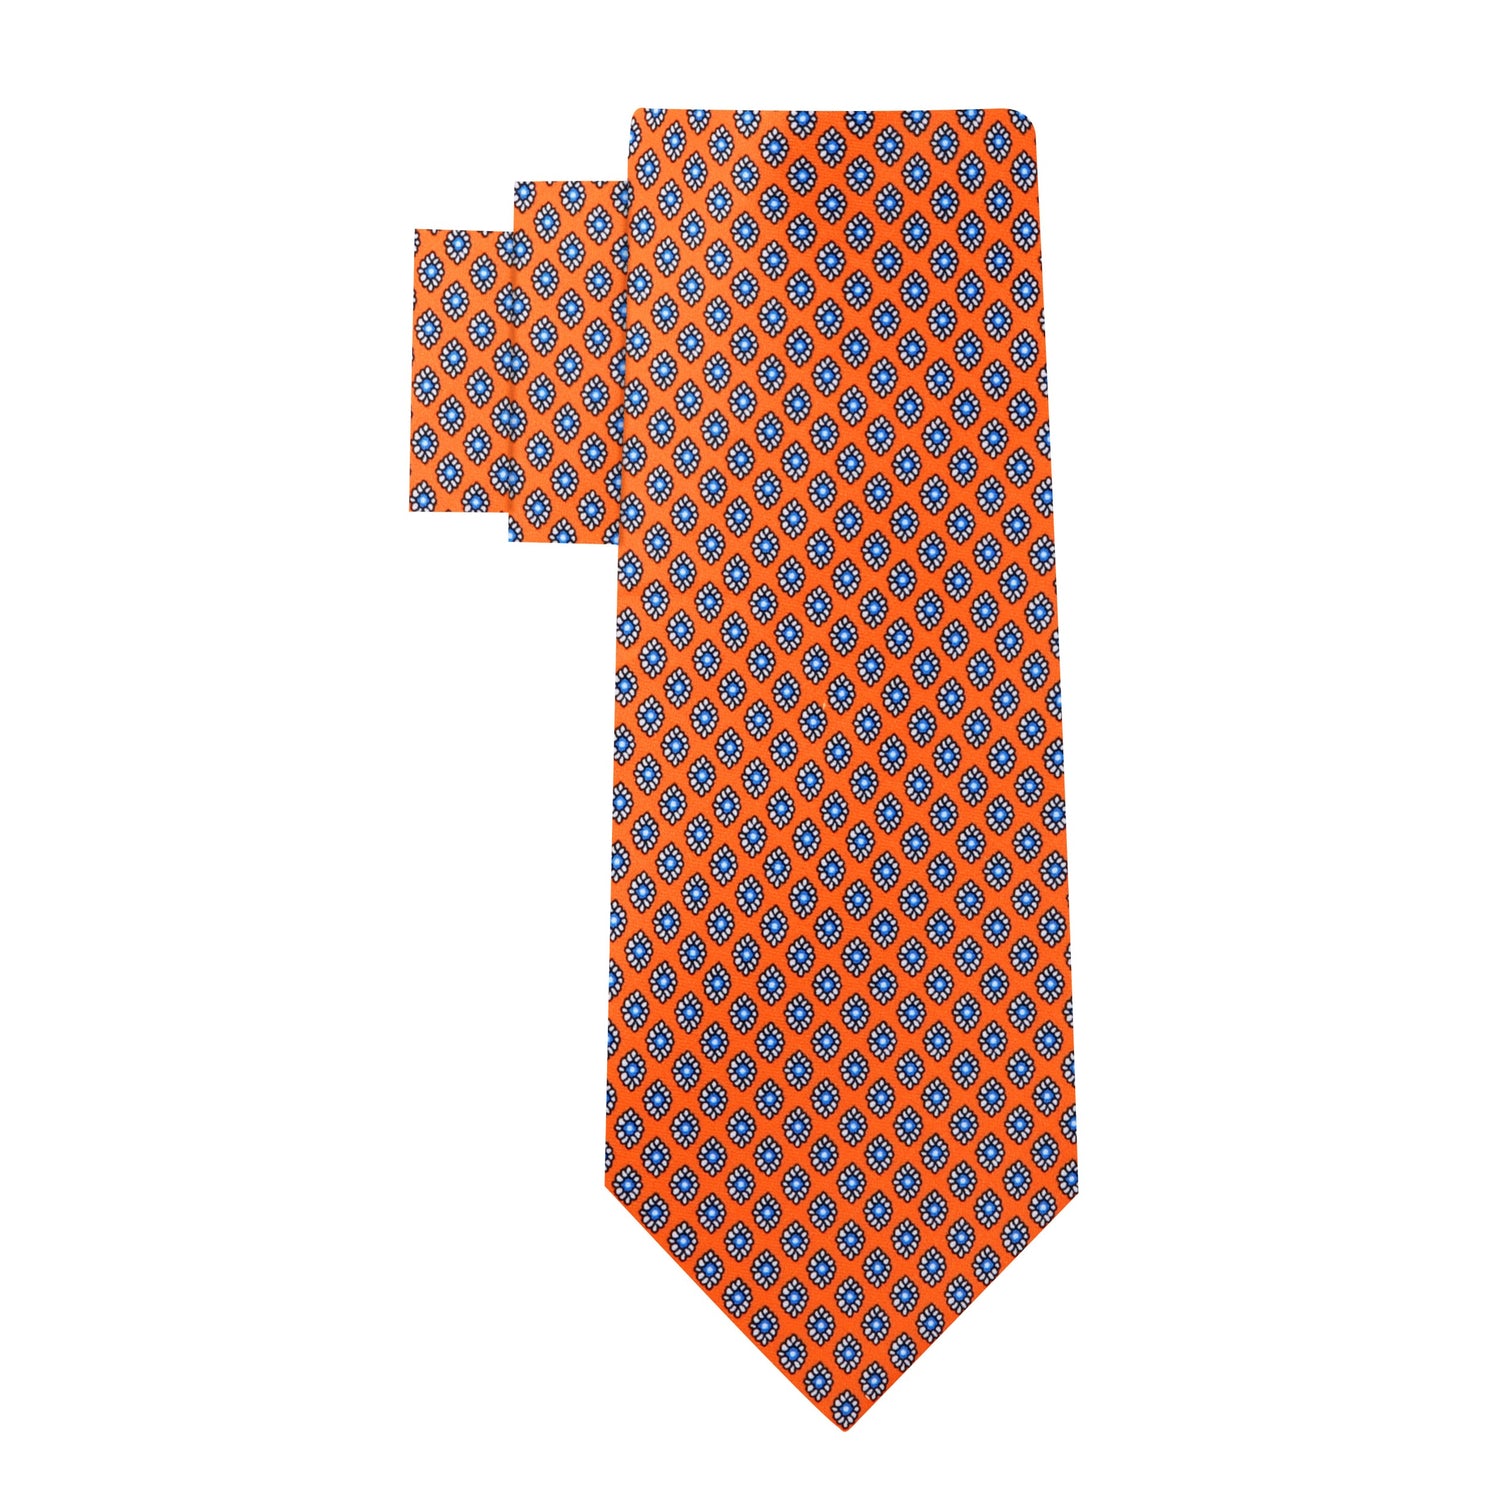 Alt View: A Necktie that is sunfire coral with a small medallion pattern